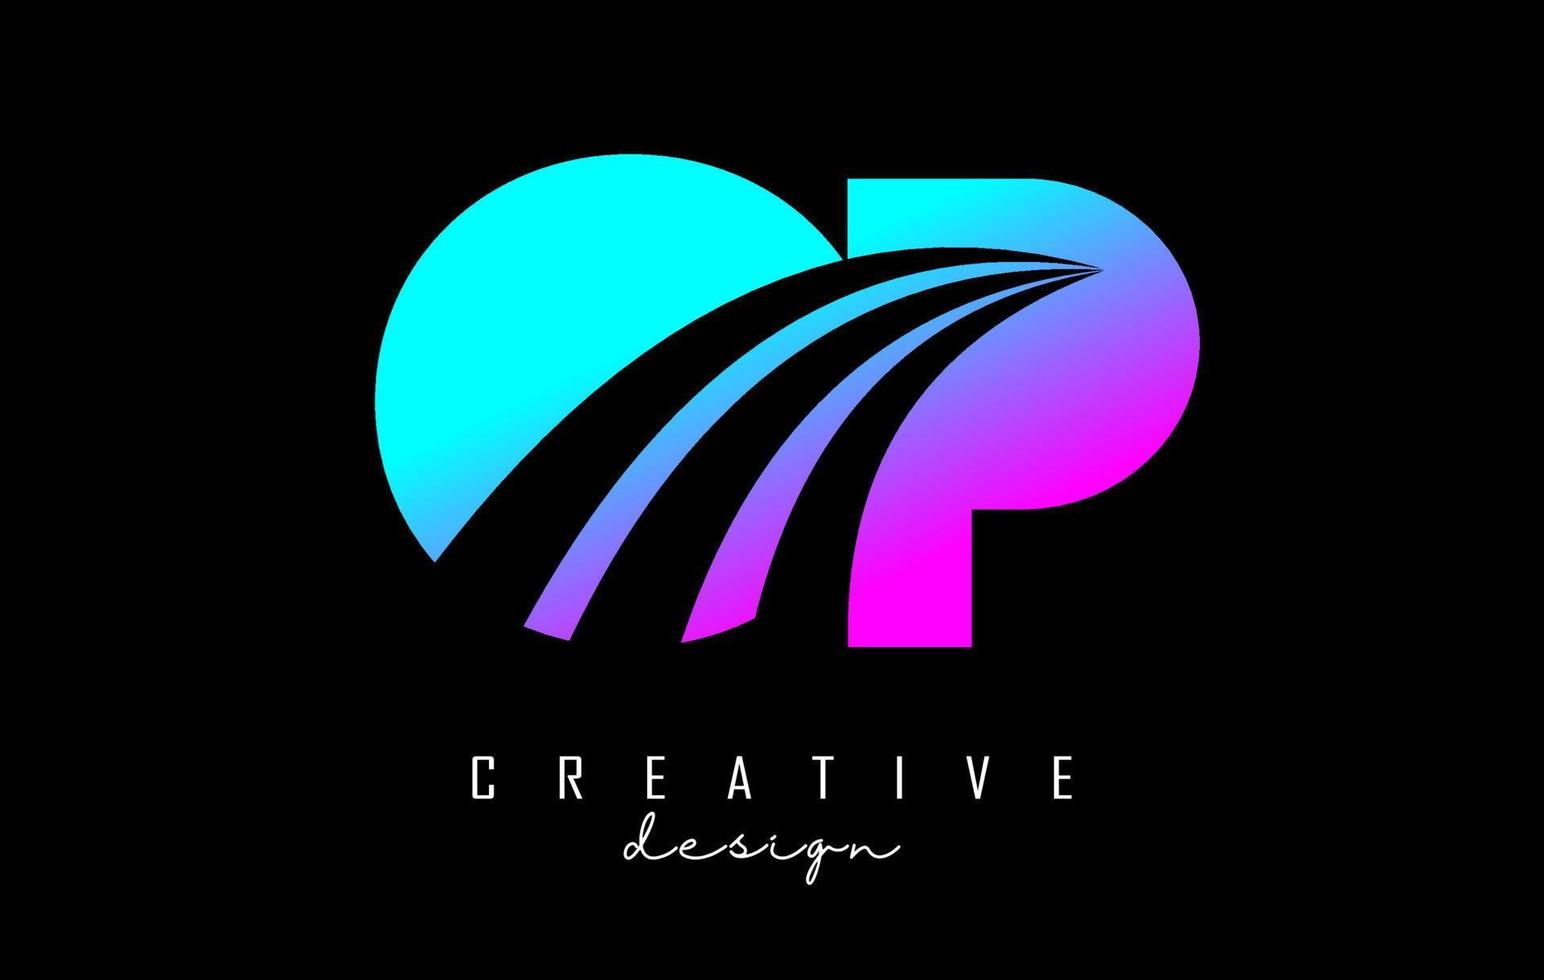 Creative colorful letters OP o p logo with leading lines and road concept design. Letters with geometric design. vector